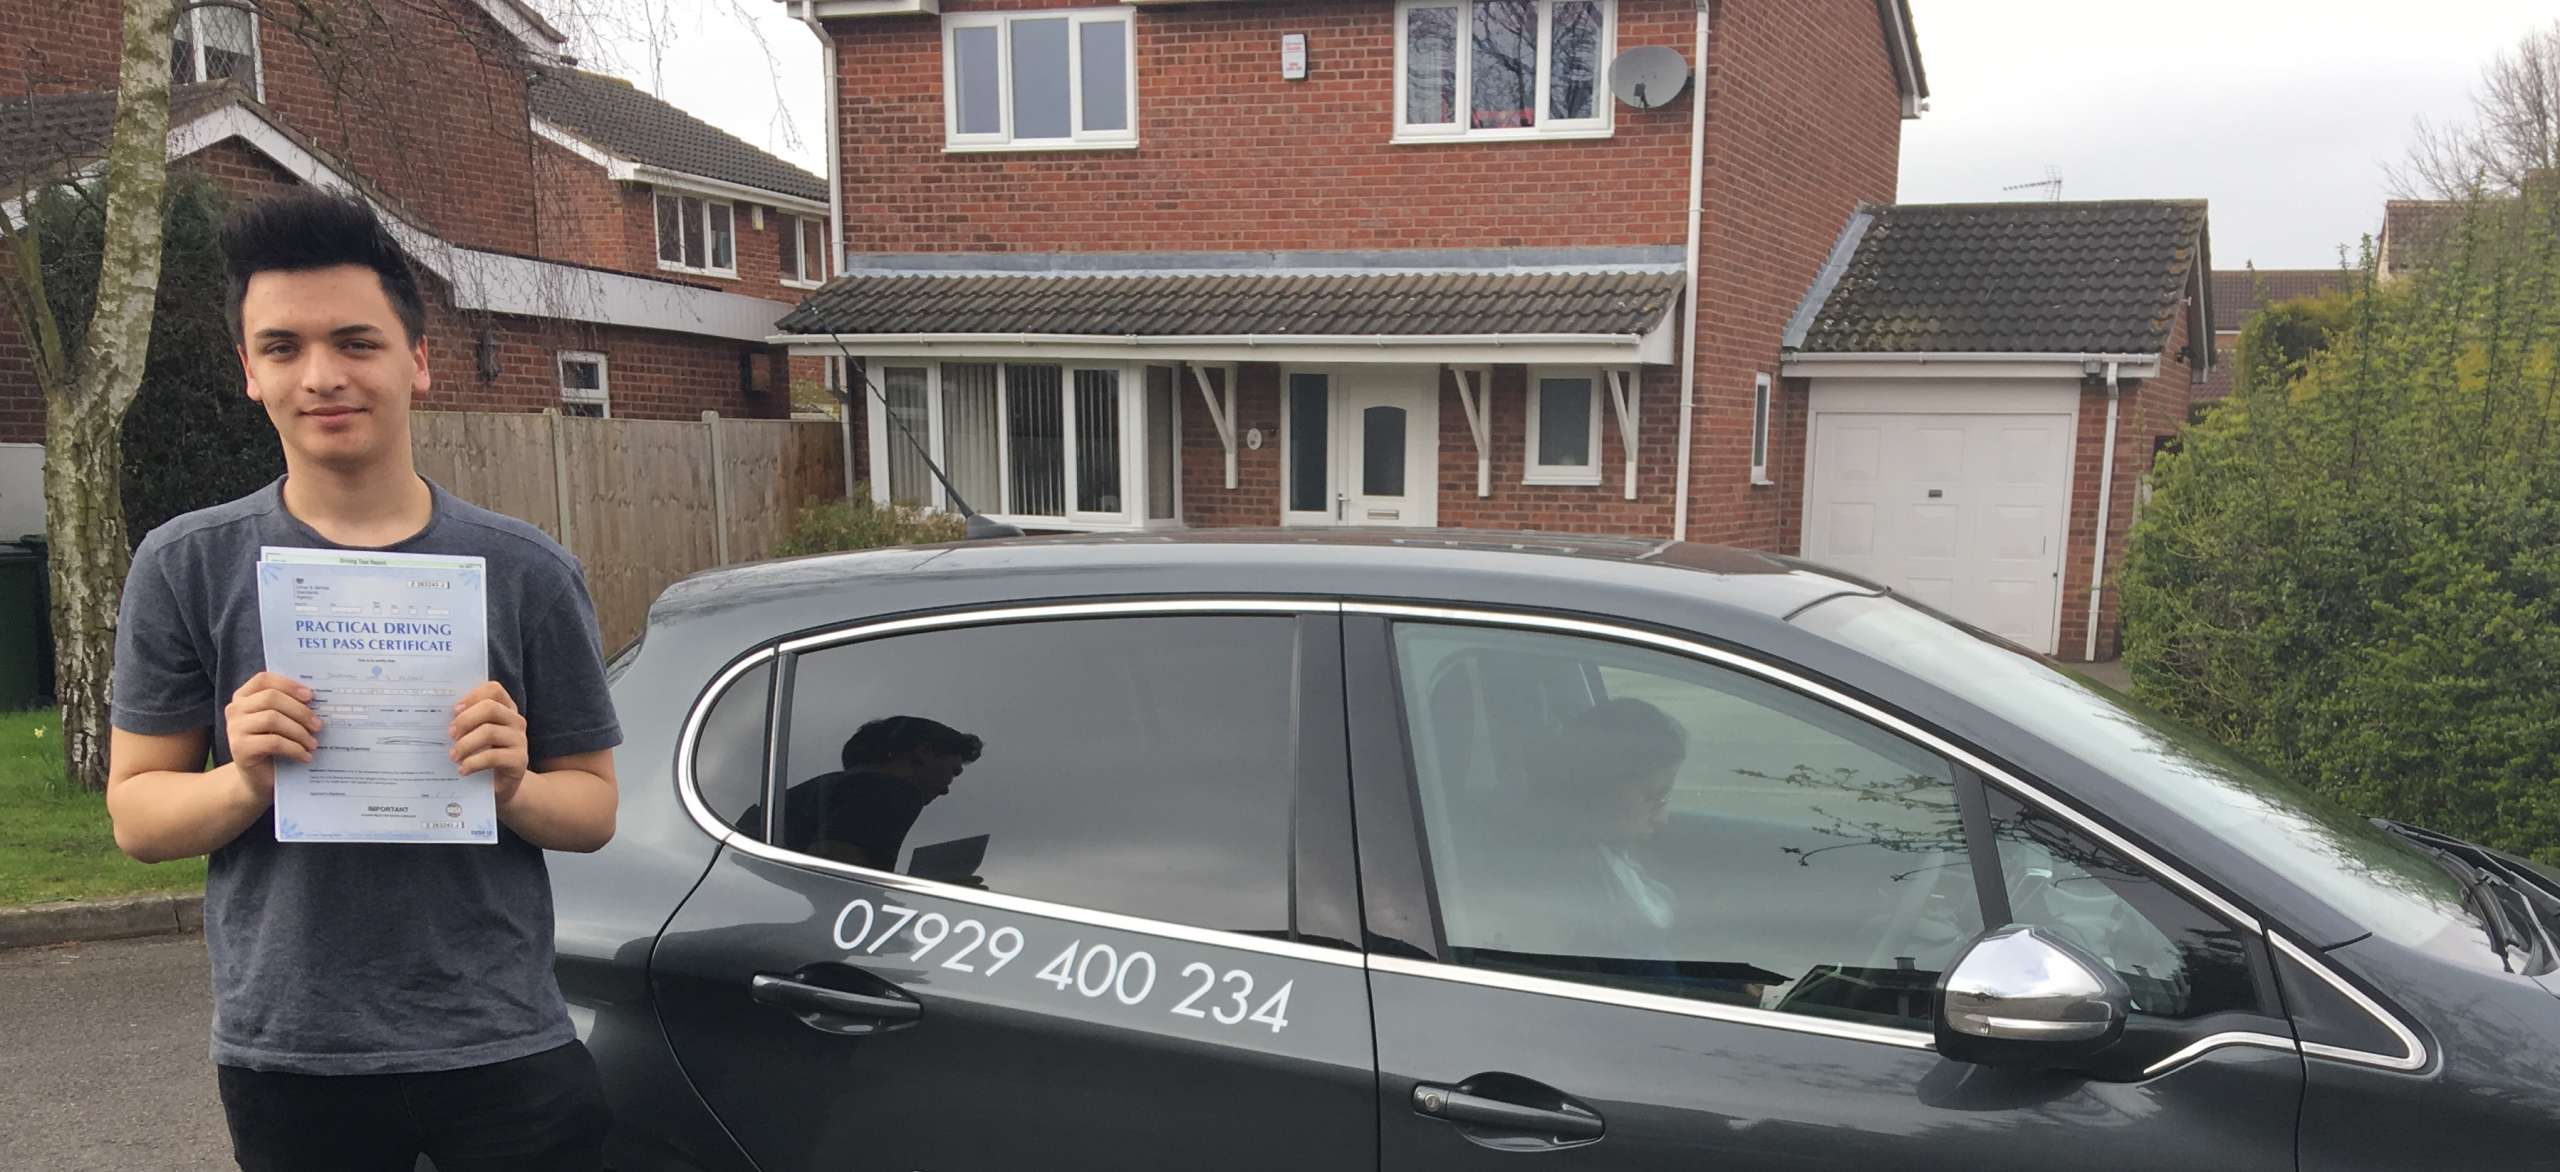 driving lessons leicester - Panchal Driving Academy - Jonathan Herron